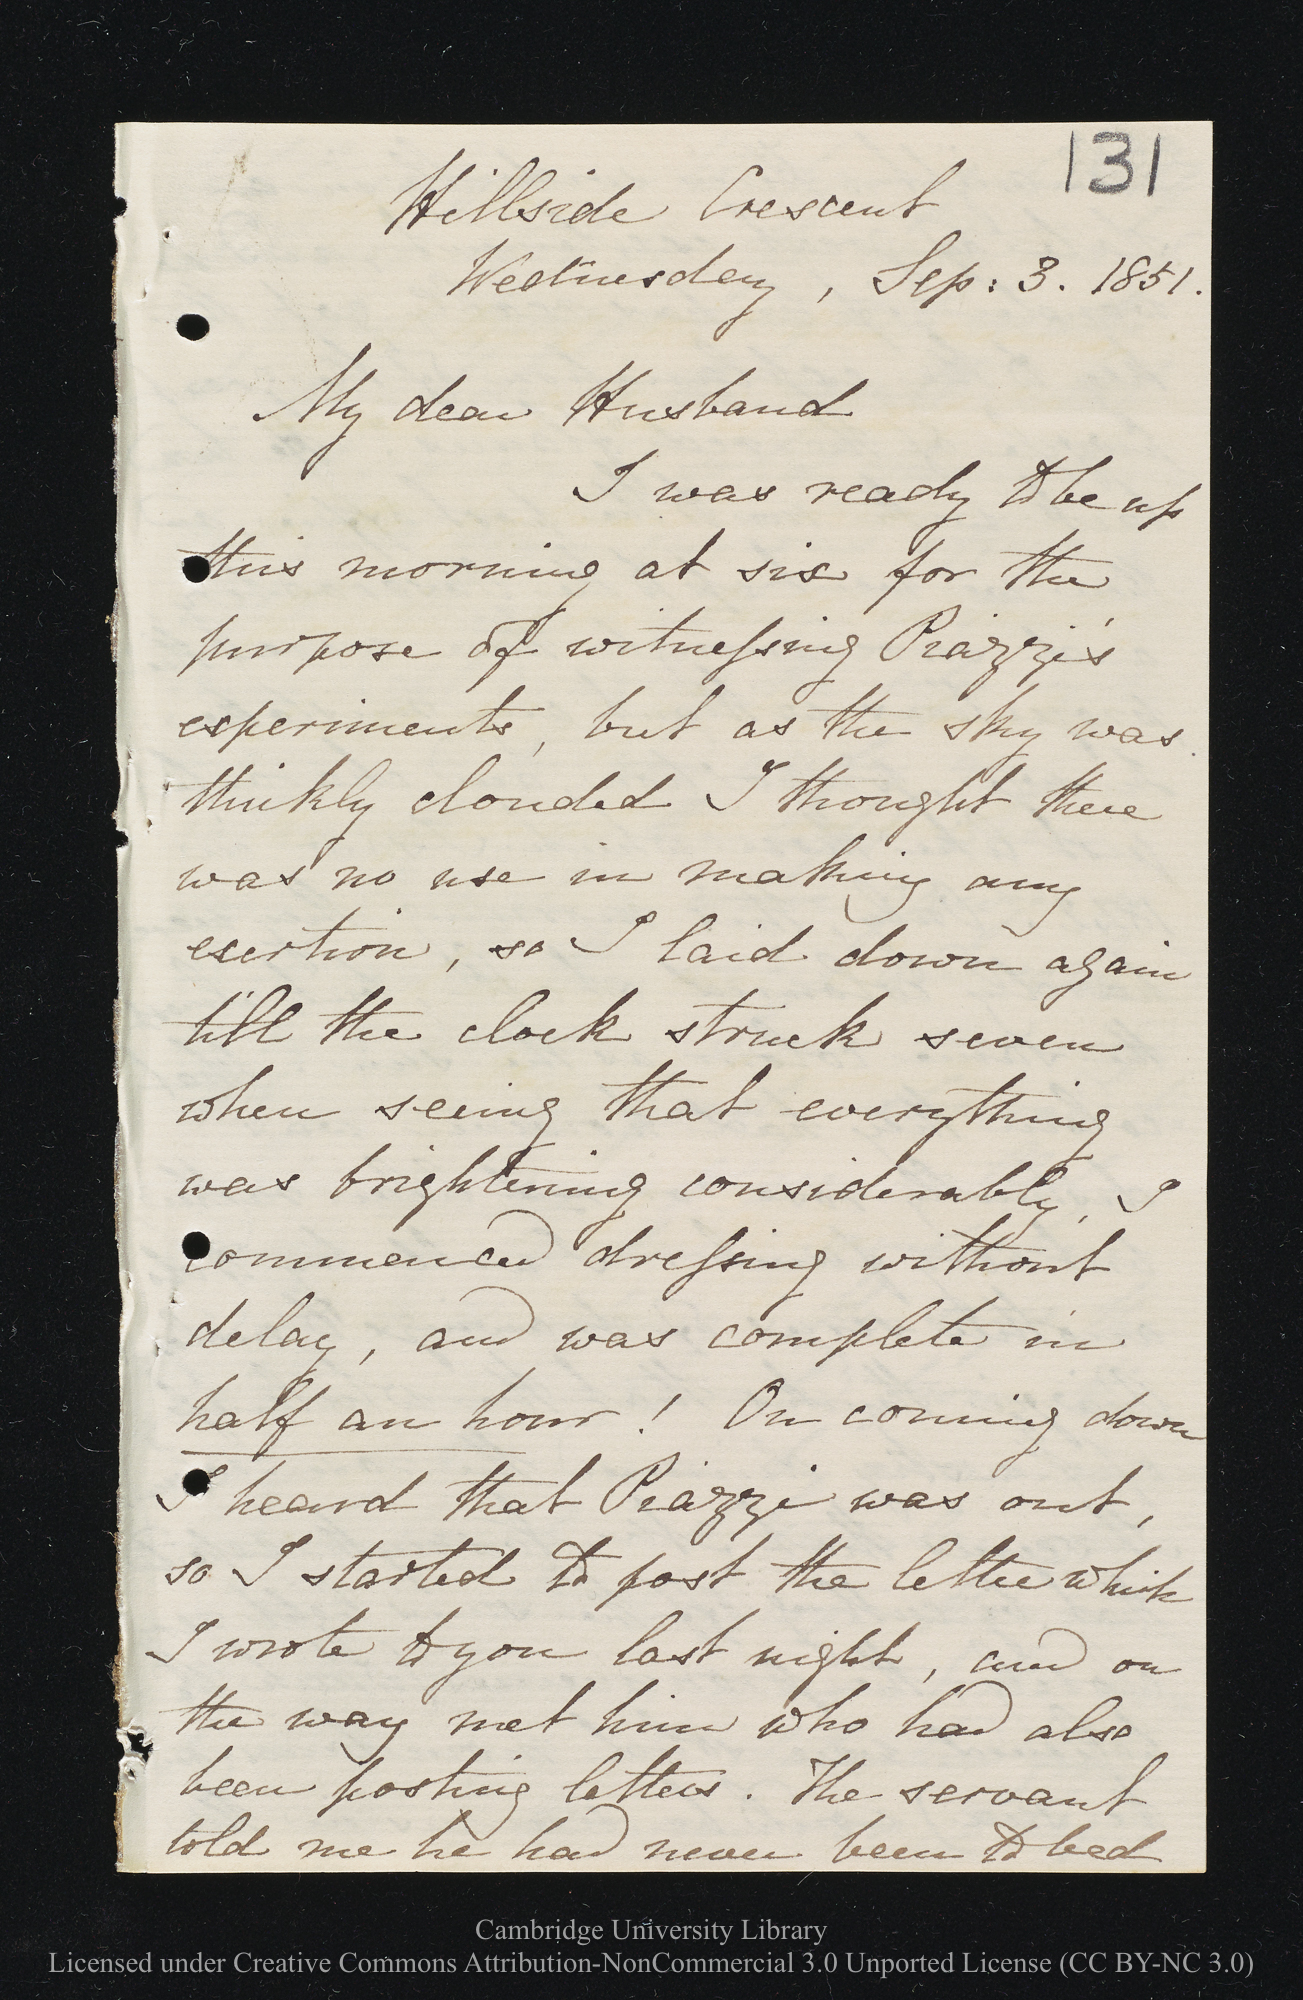 Illustrated letter from Richarda Airy to her husband, George Biddell Airy